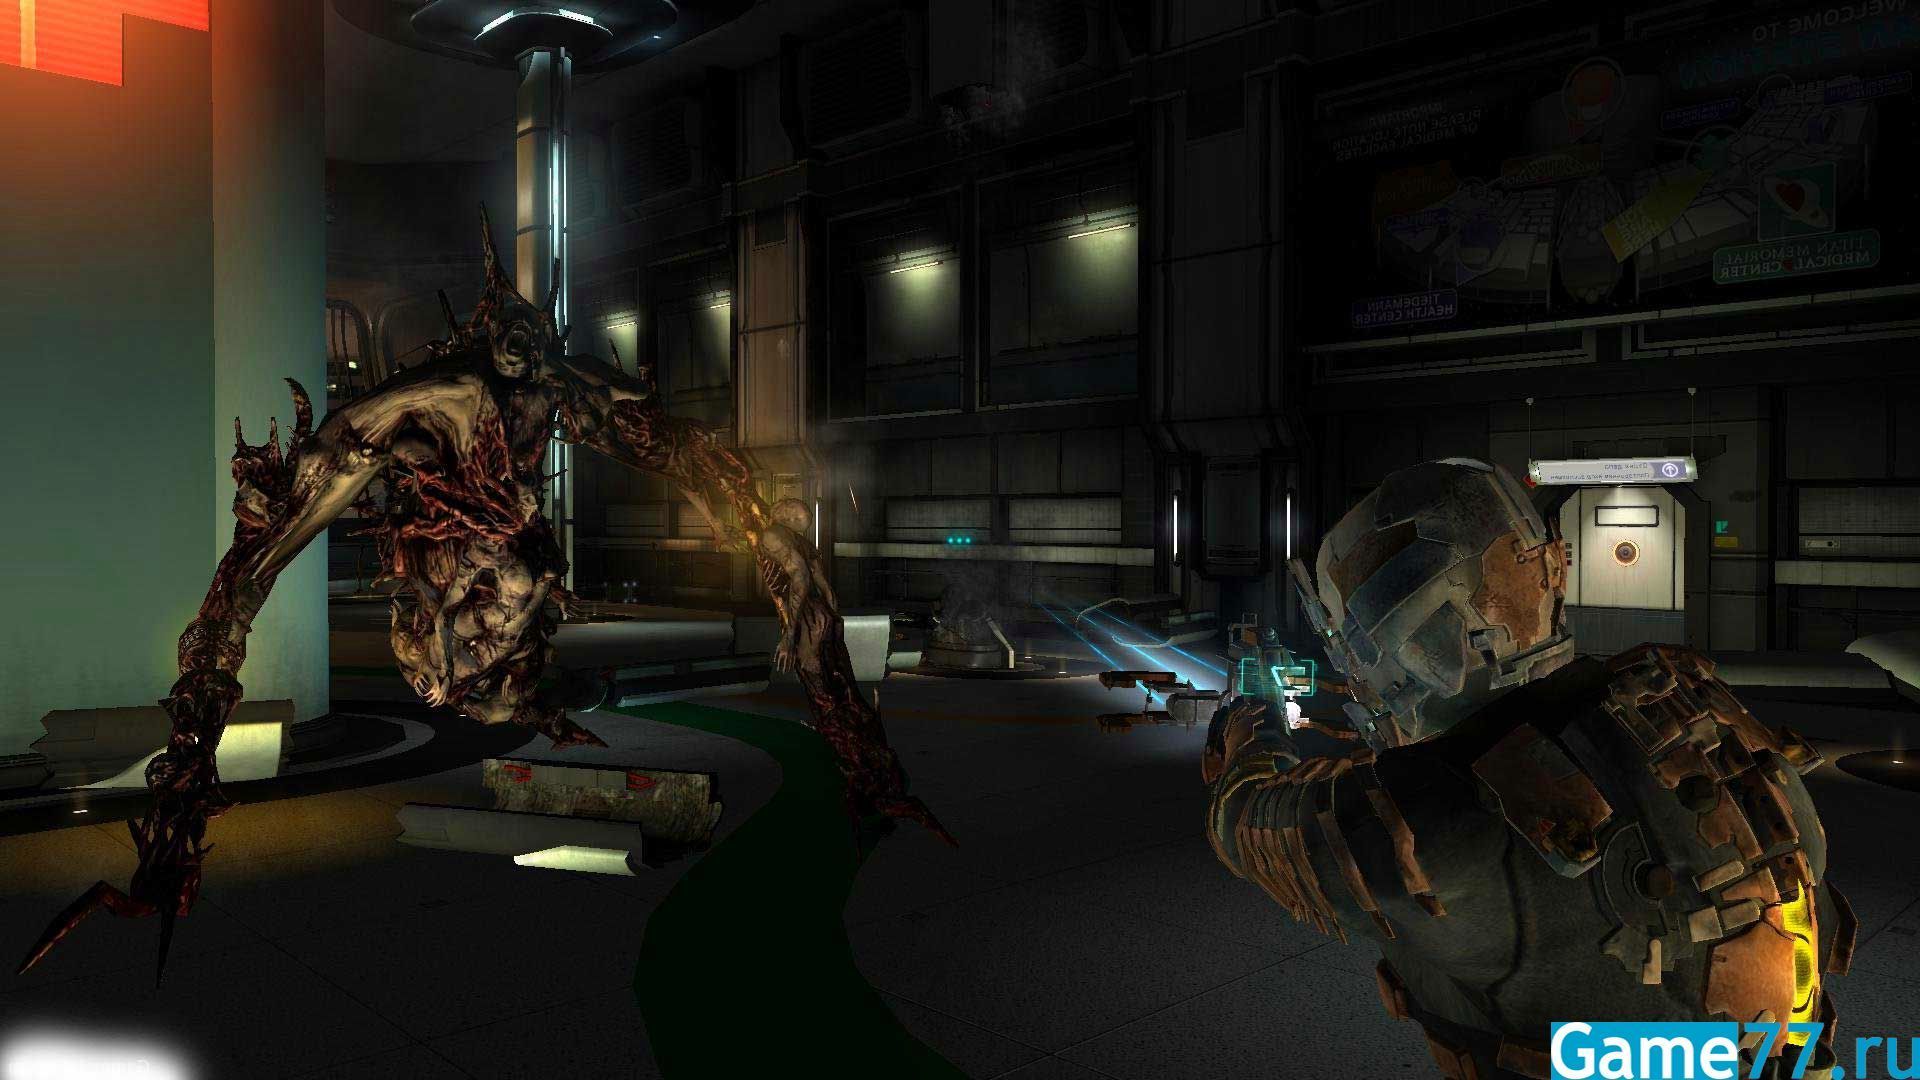 Игра dead space отзывы. Дед Спейс 2. Dead Space 2 Limited Edition ps3. Dead Space 3 [ps3]. Dead Space 2 ps3.